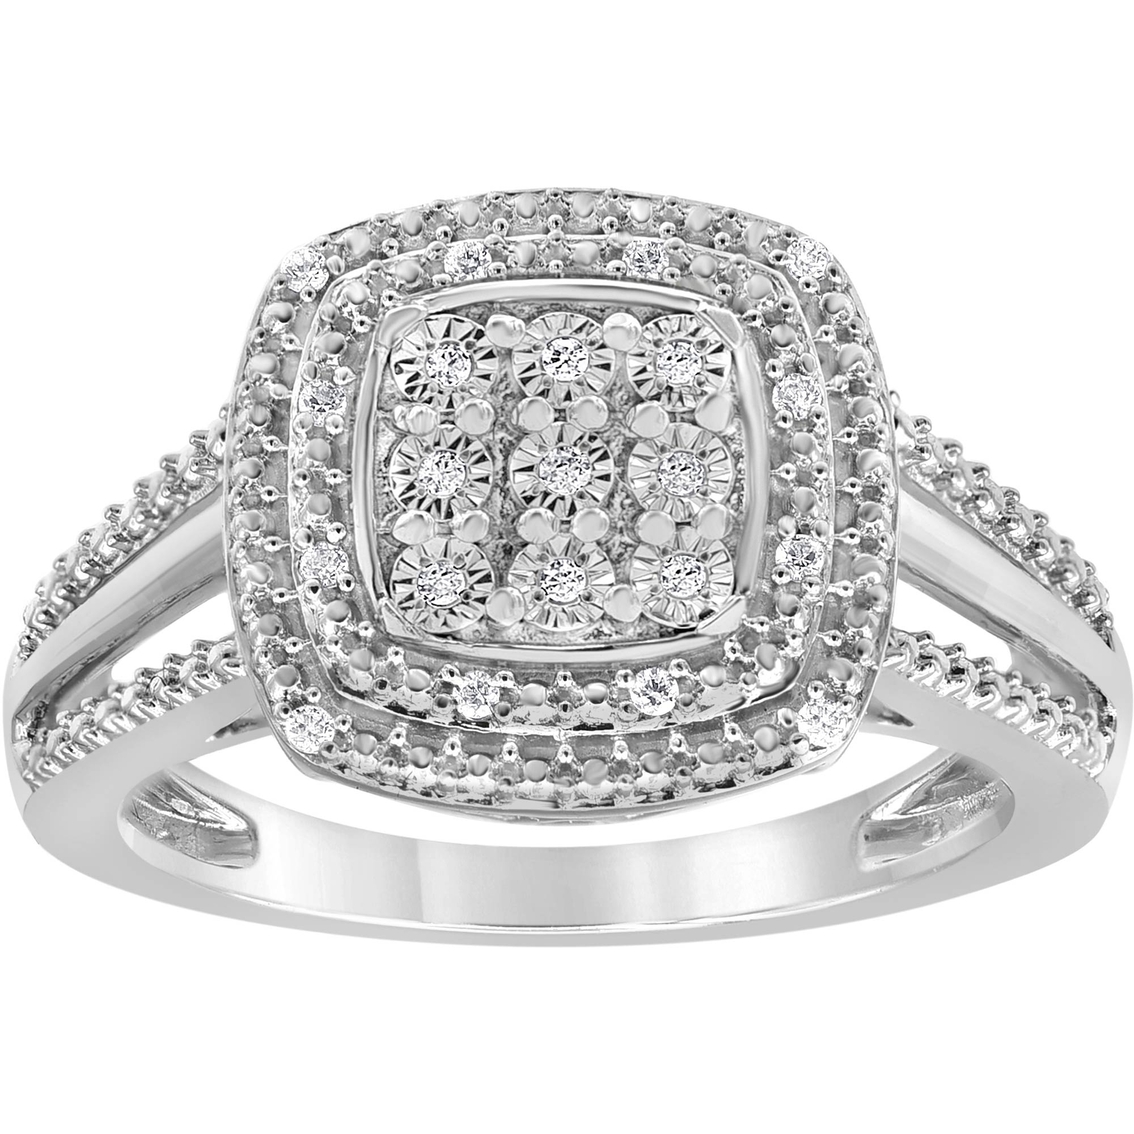 Sterling Silver 1/10 CTW Diamond Cushion Halo Ring - Image 1 of 3